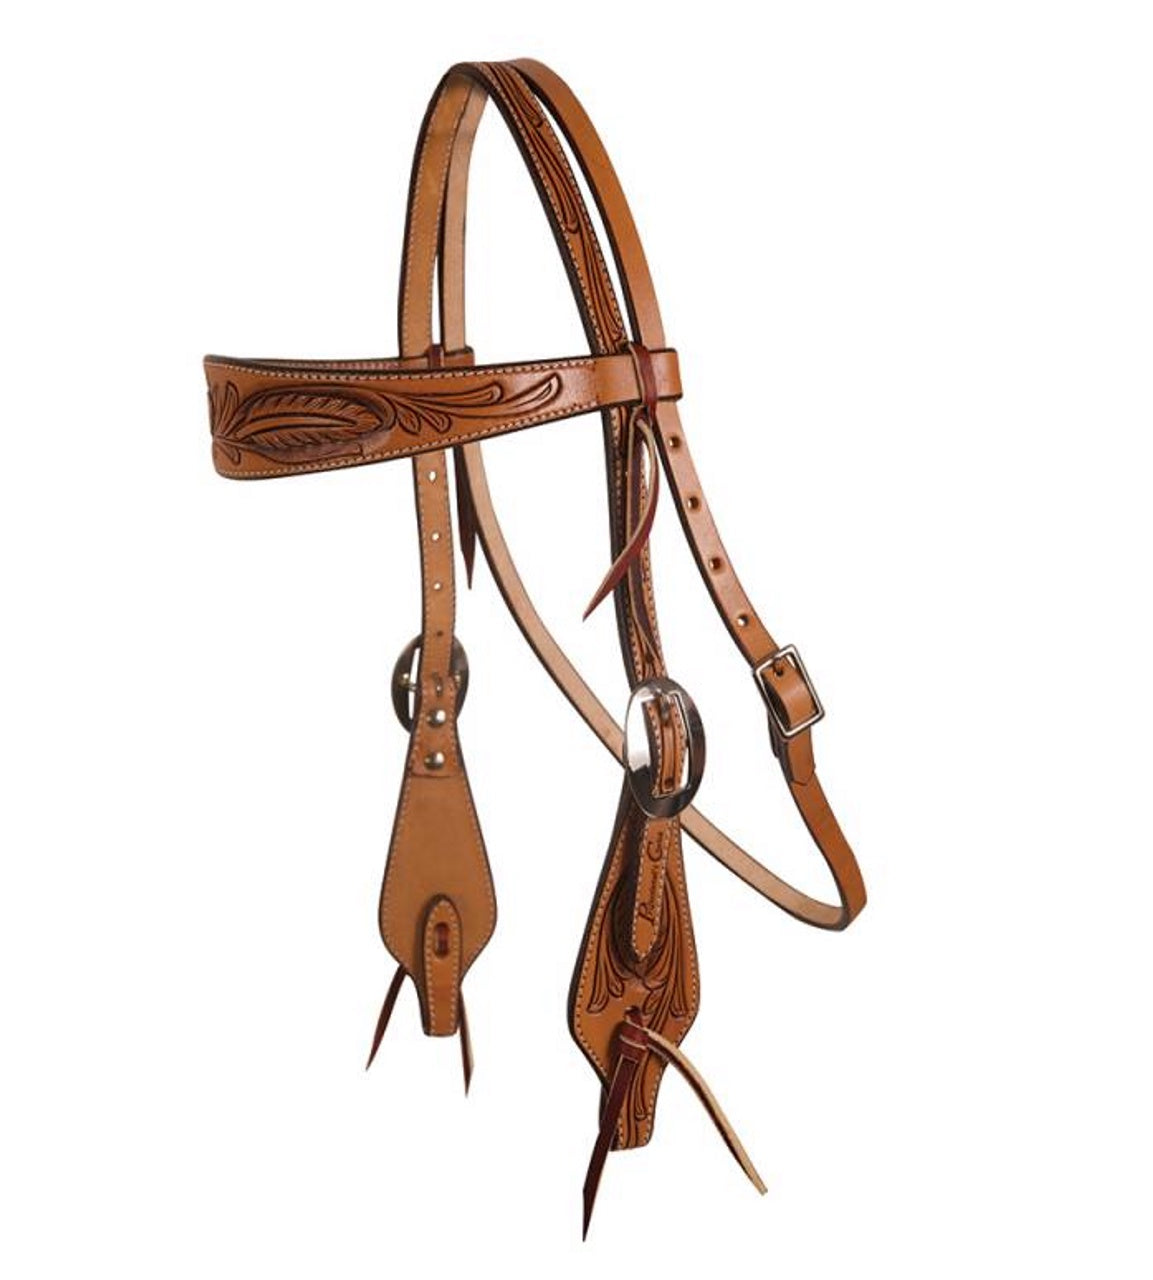 Professional's Choice Feather Bowband Headstall